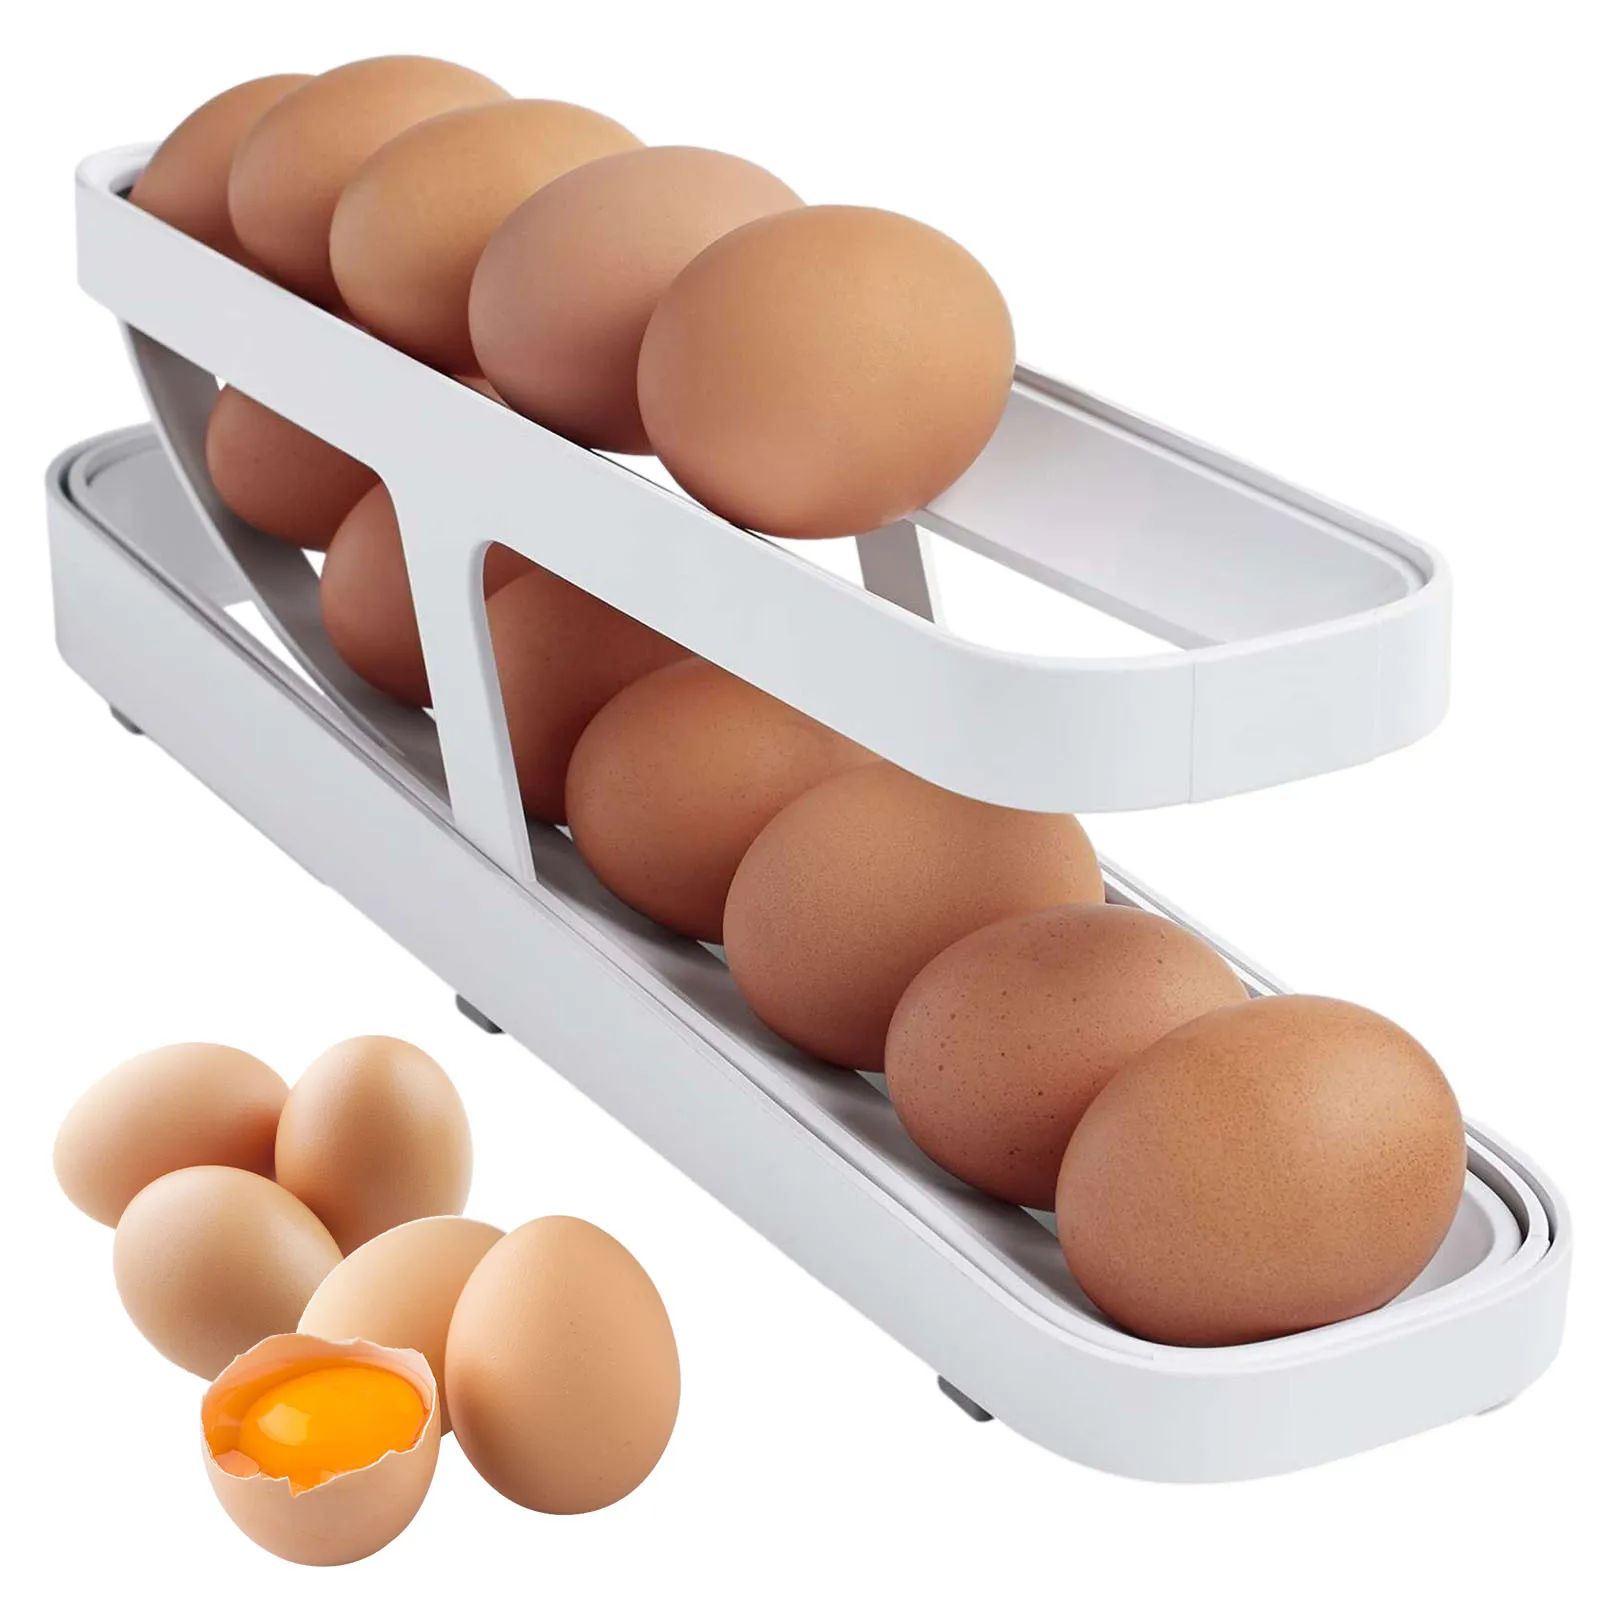 OWNSWING Refrigerator For Egg Container Plastic Food Storage Container BPA -Free Plastic Egg Organizer Holder